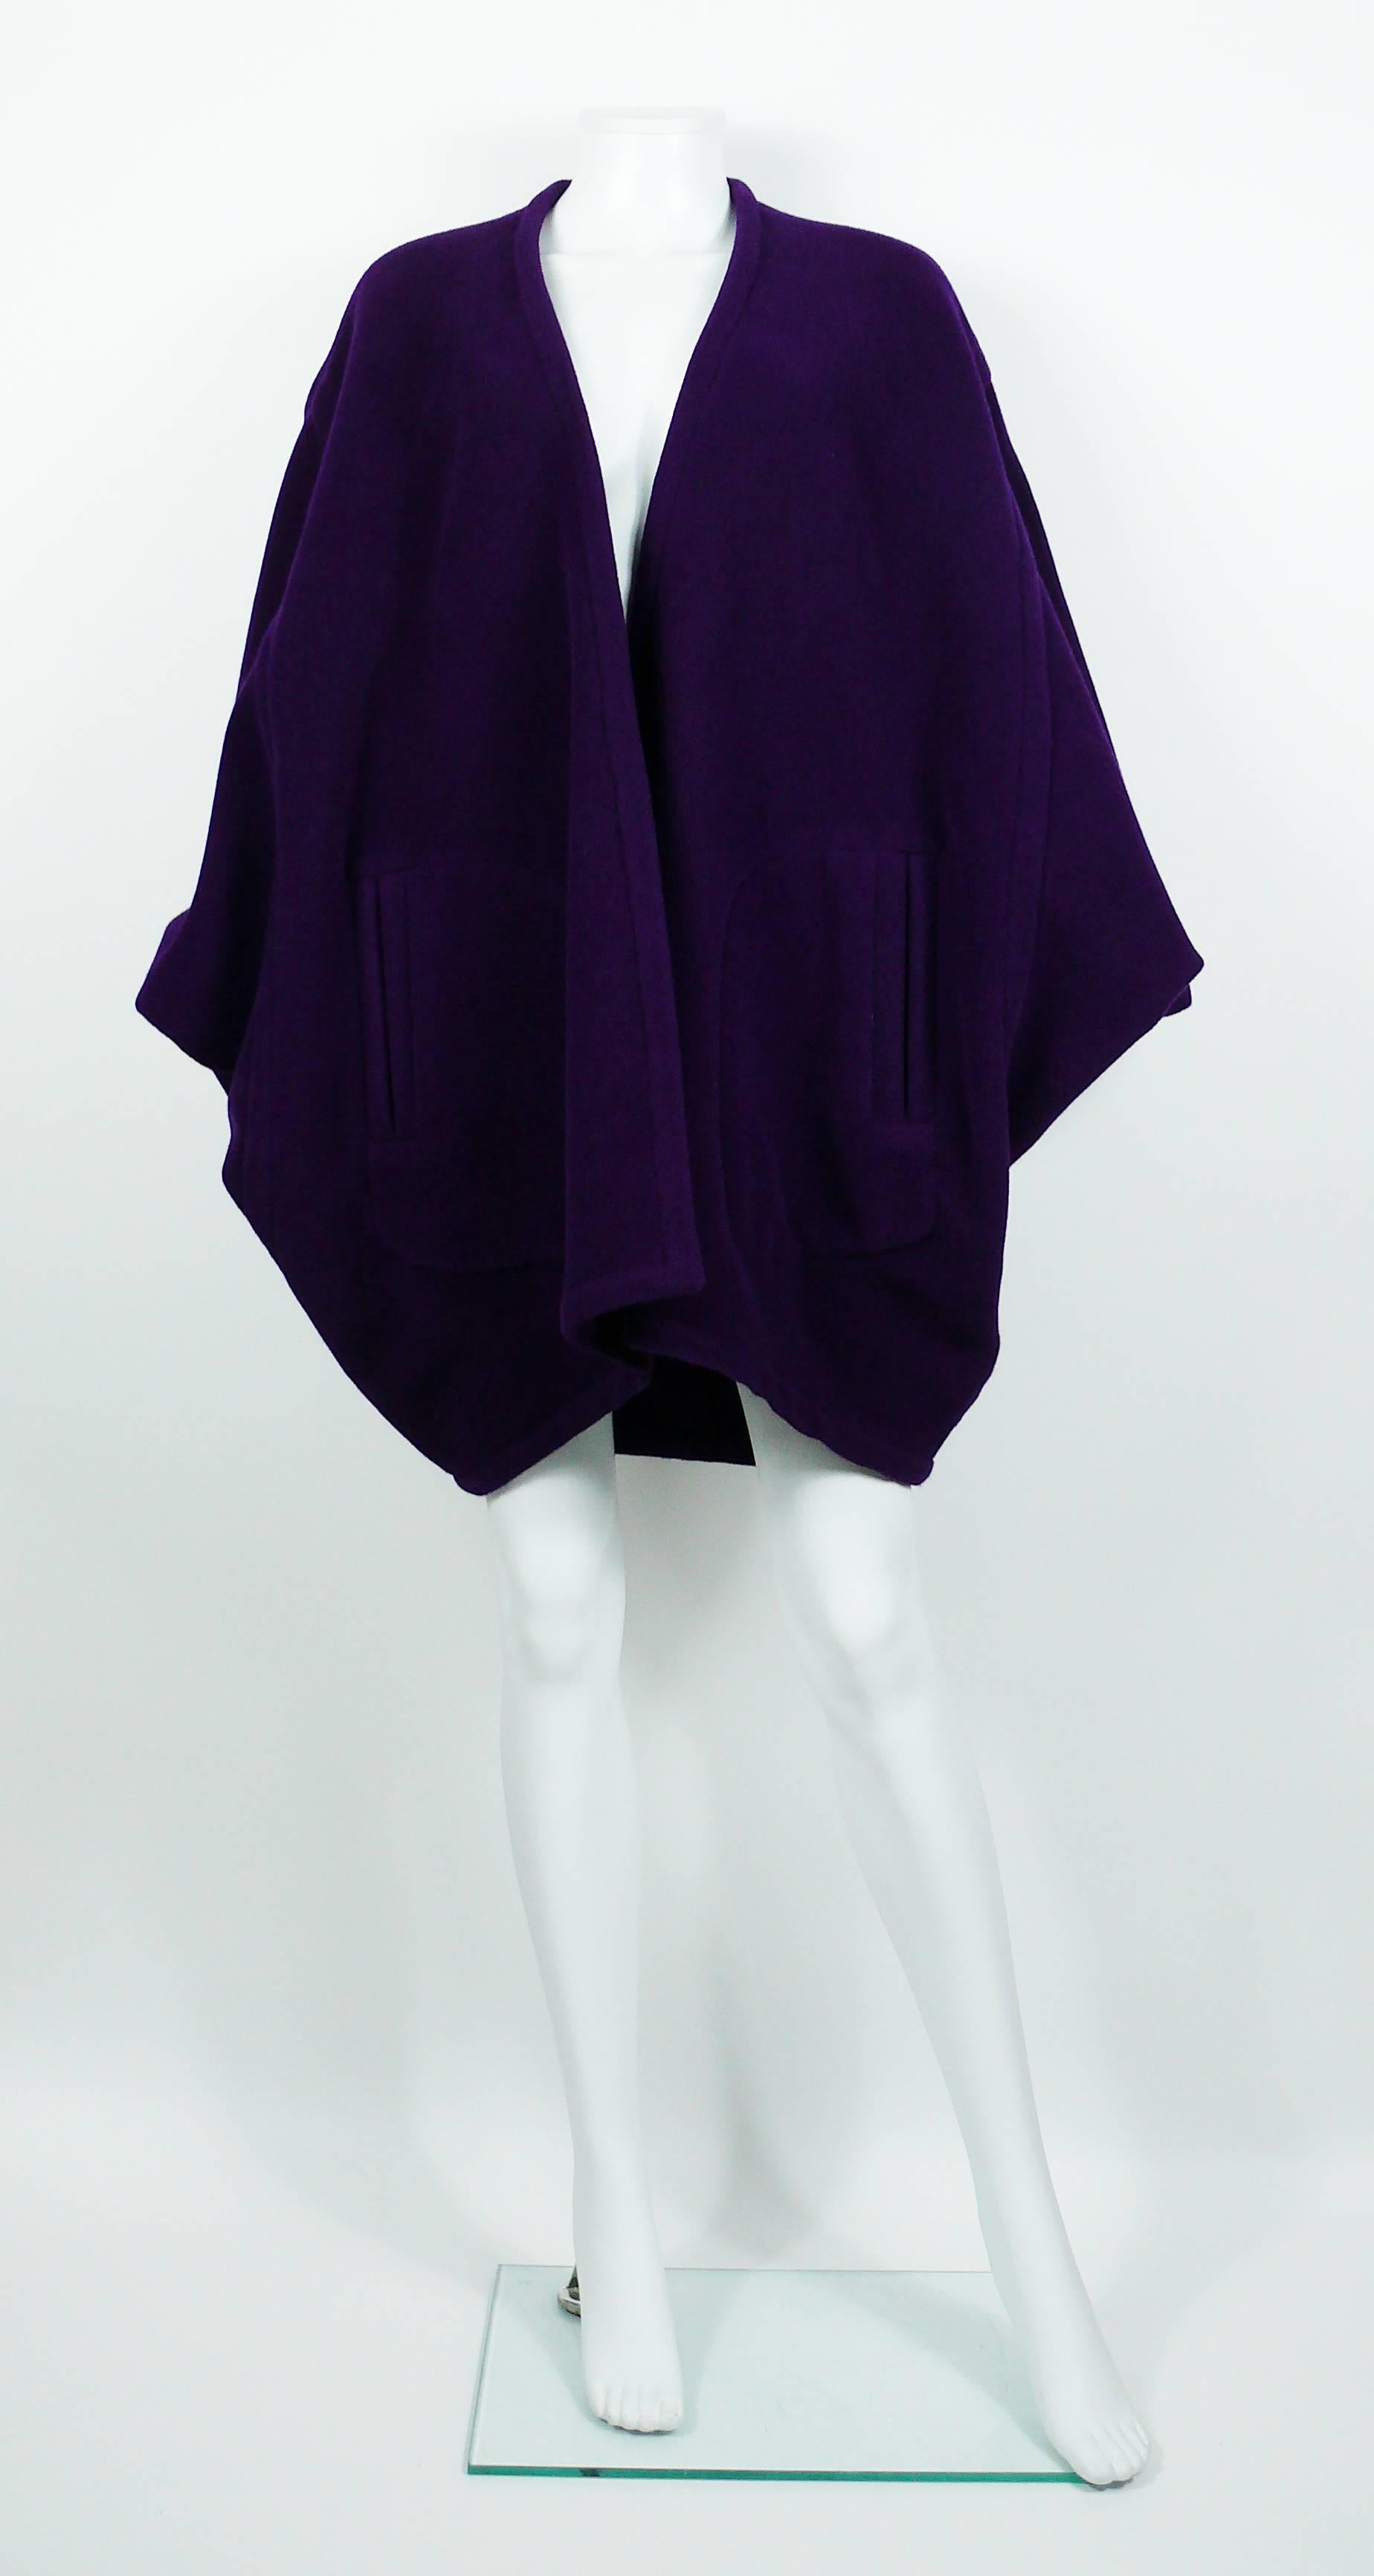 Yves Saint Laurent Rive Gauche Vintage Purple Cape In Good Condition For Sale In Nice, FR